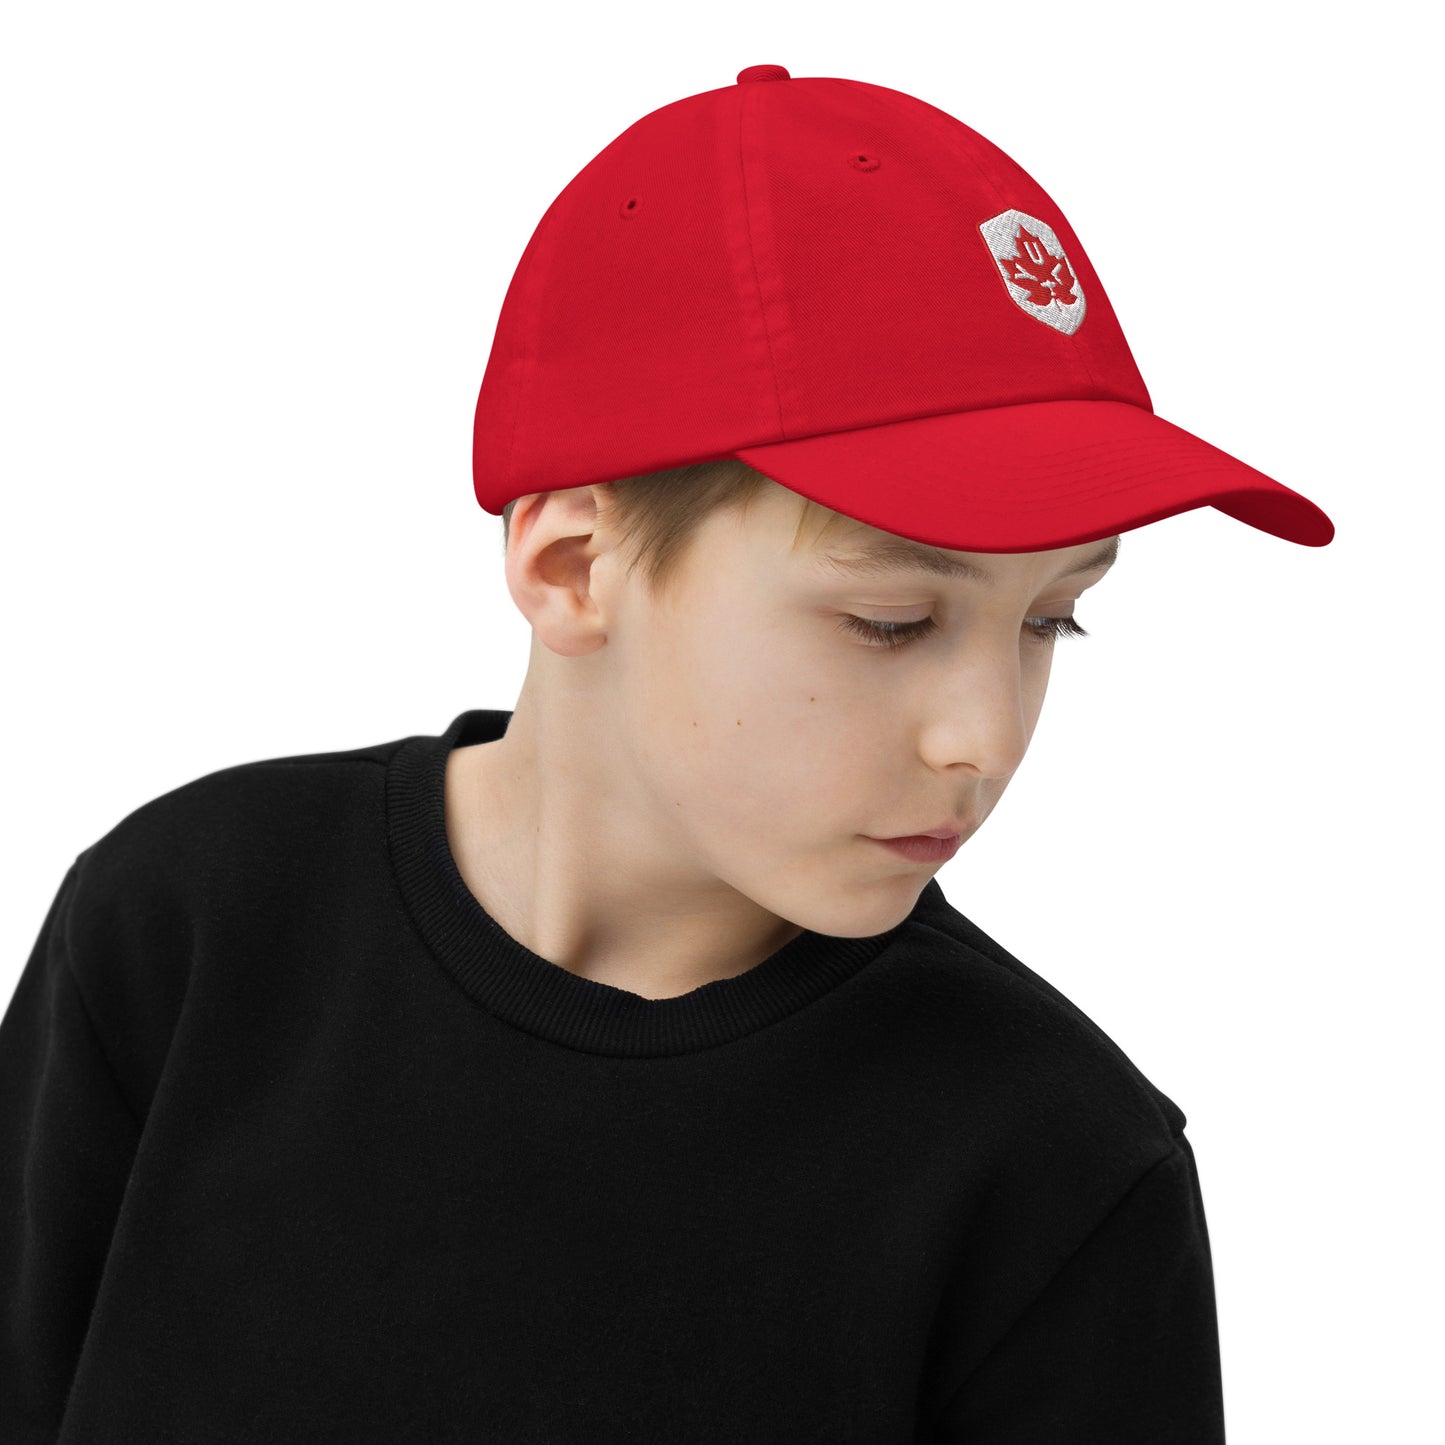 Maple Leaf Kid's Cap - Red/White • YUL Montreal • YHM Designs - Image 08